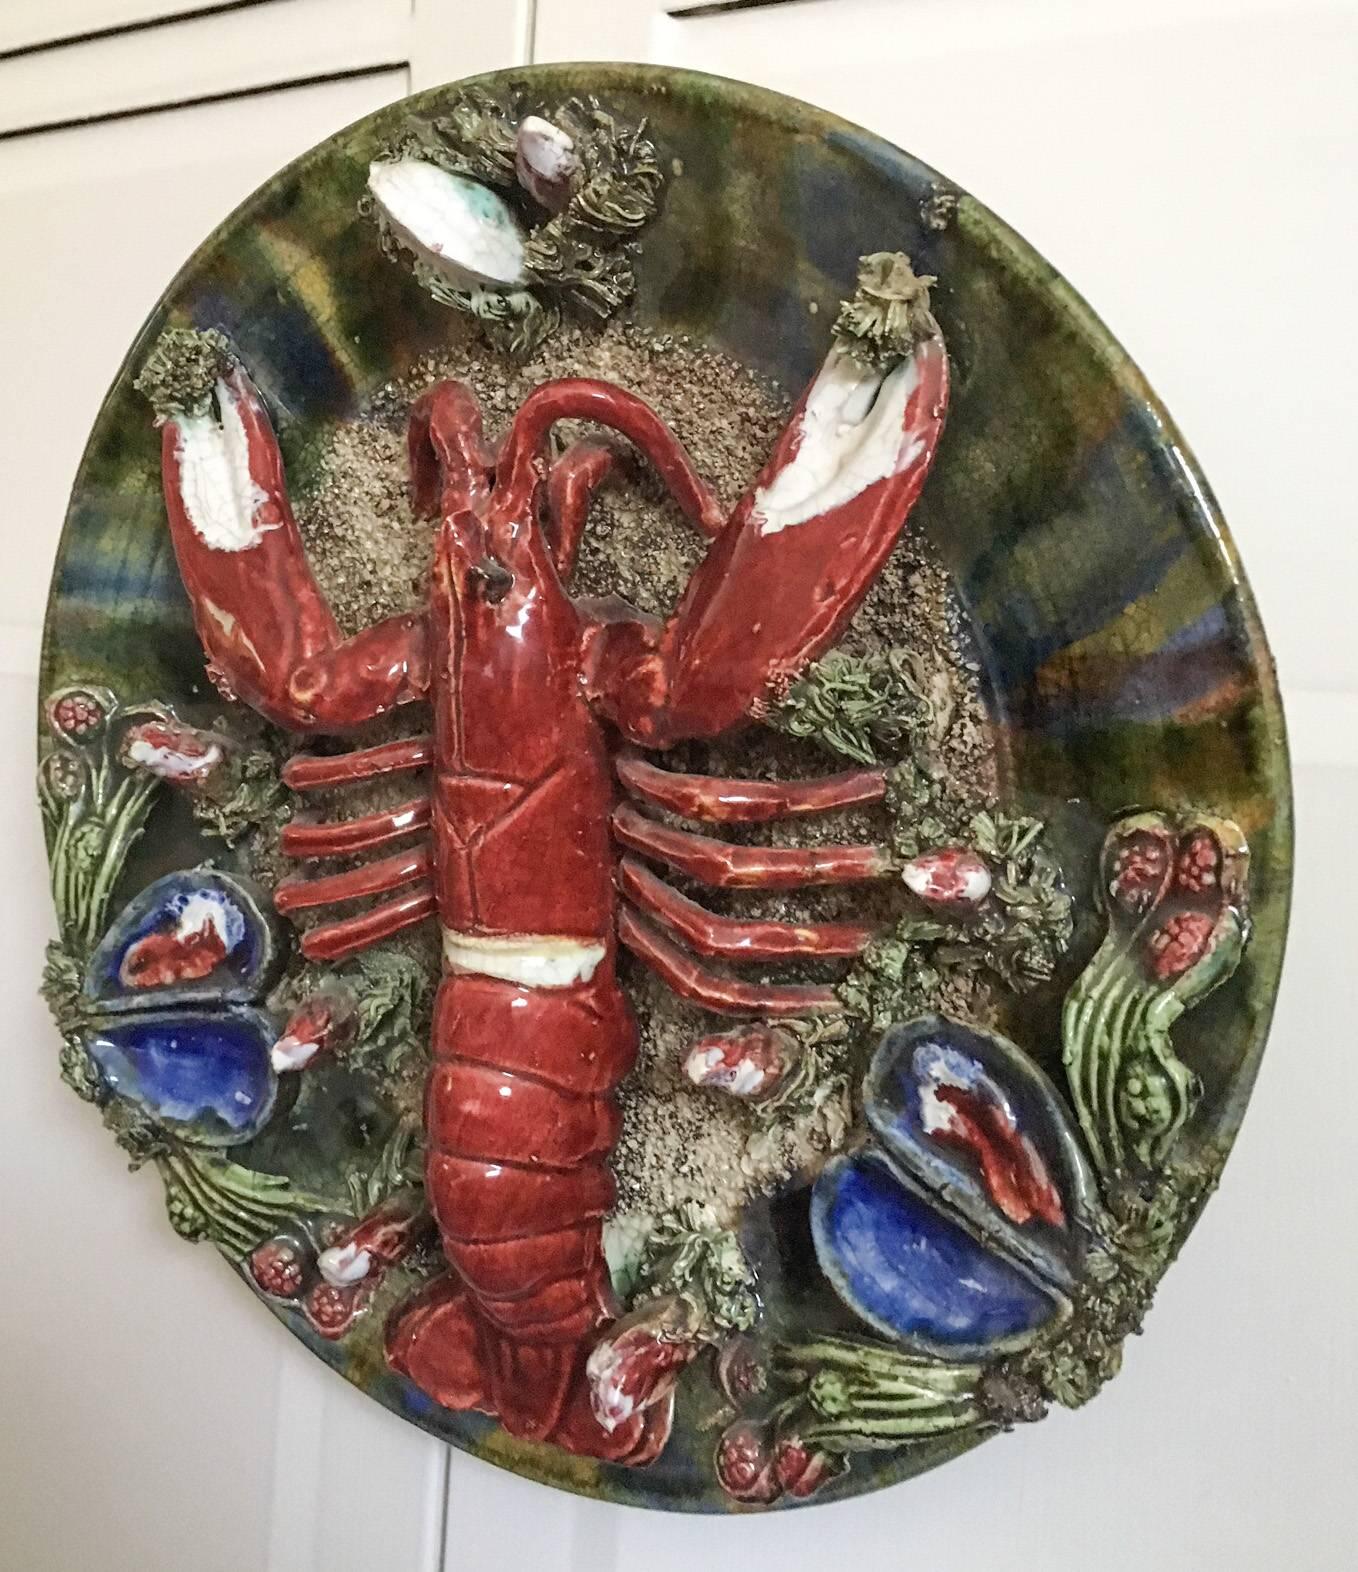 Incredibly detailed Majolica-style Portugese Pallisy wall plaque by ceramist Jose a Cunha of Caldas de Rainha, Portugal. The plaque has the Cunha embossed glove-shaped impressed mark on the verso as shown. Wall platter is decorated in rich